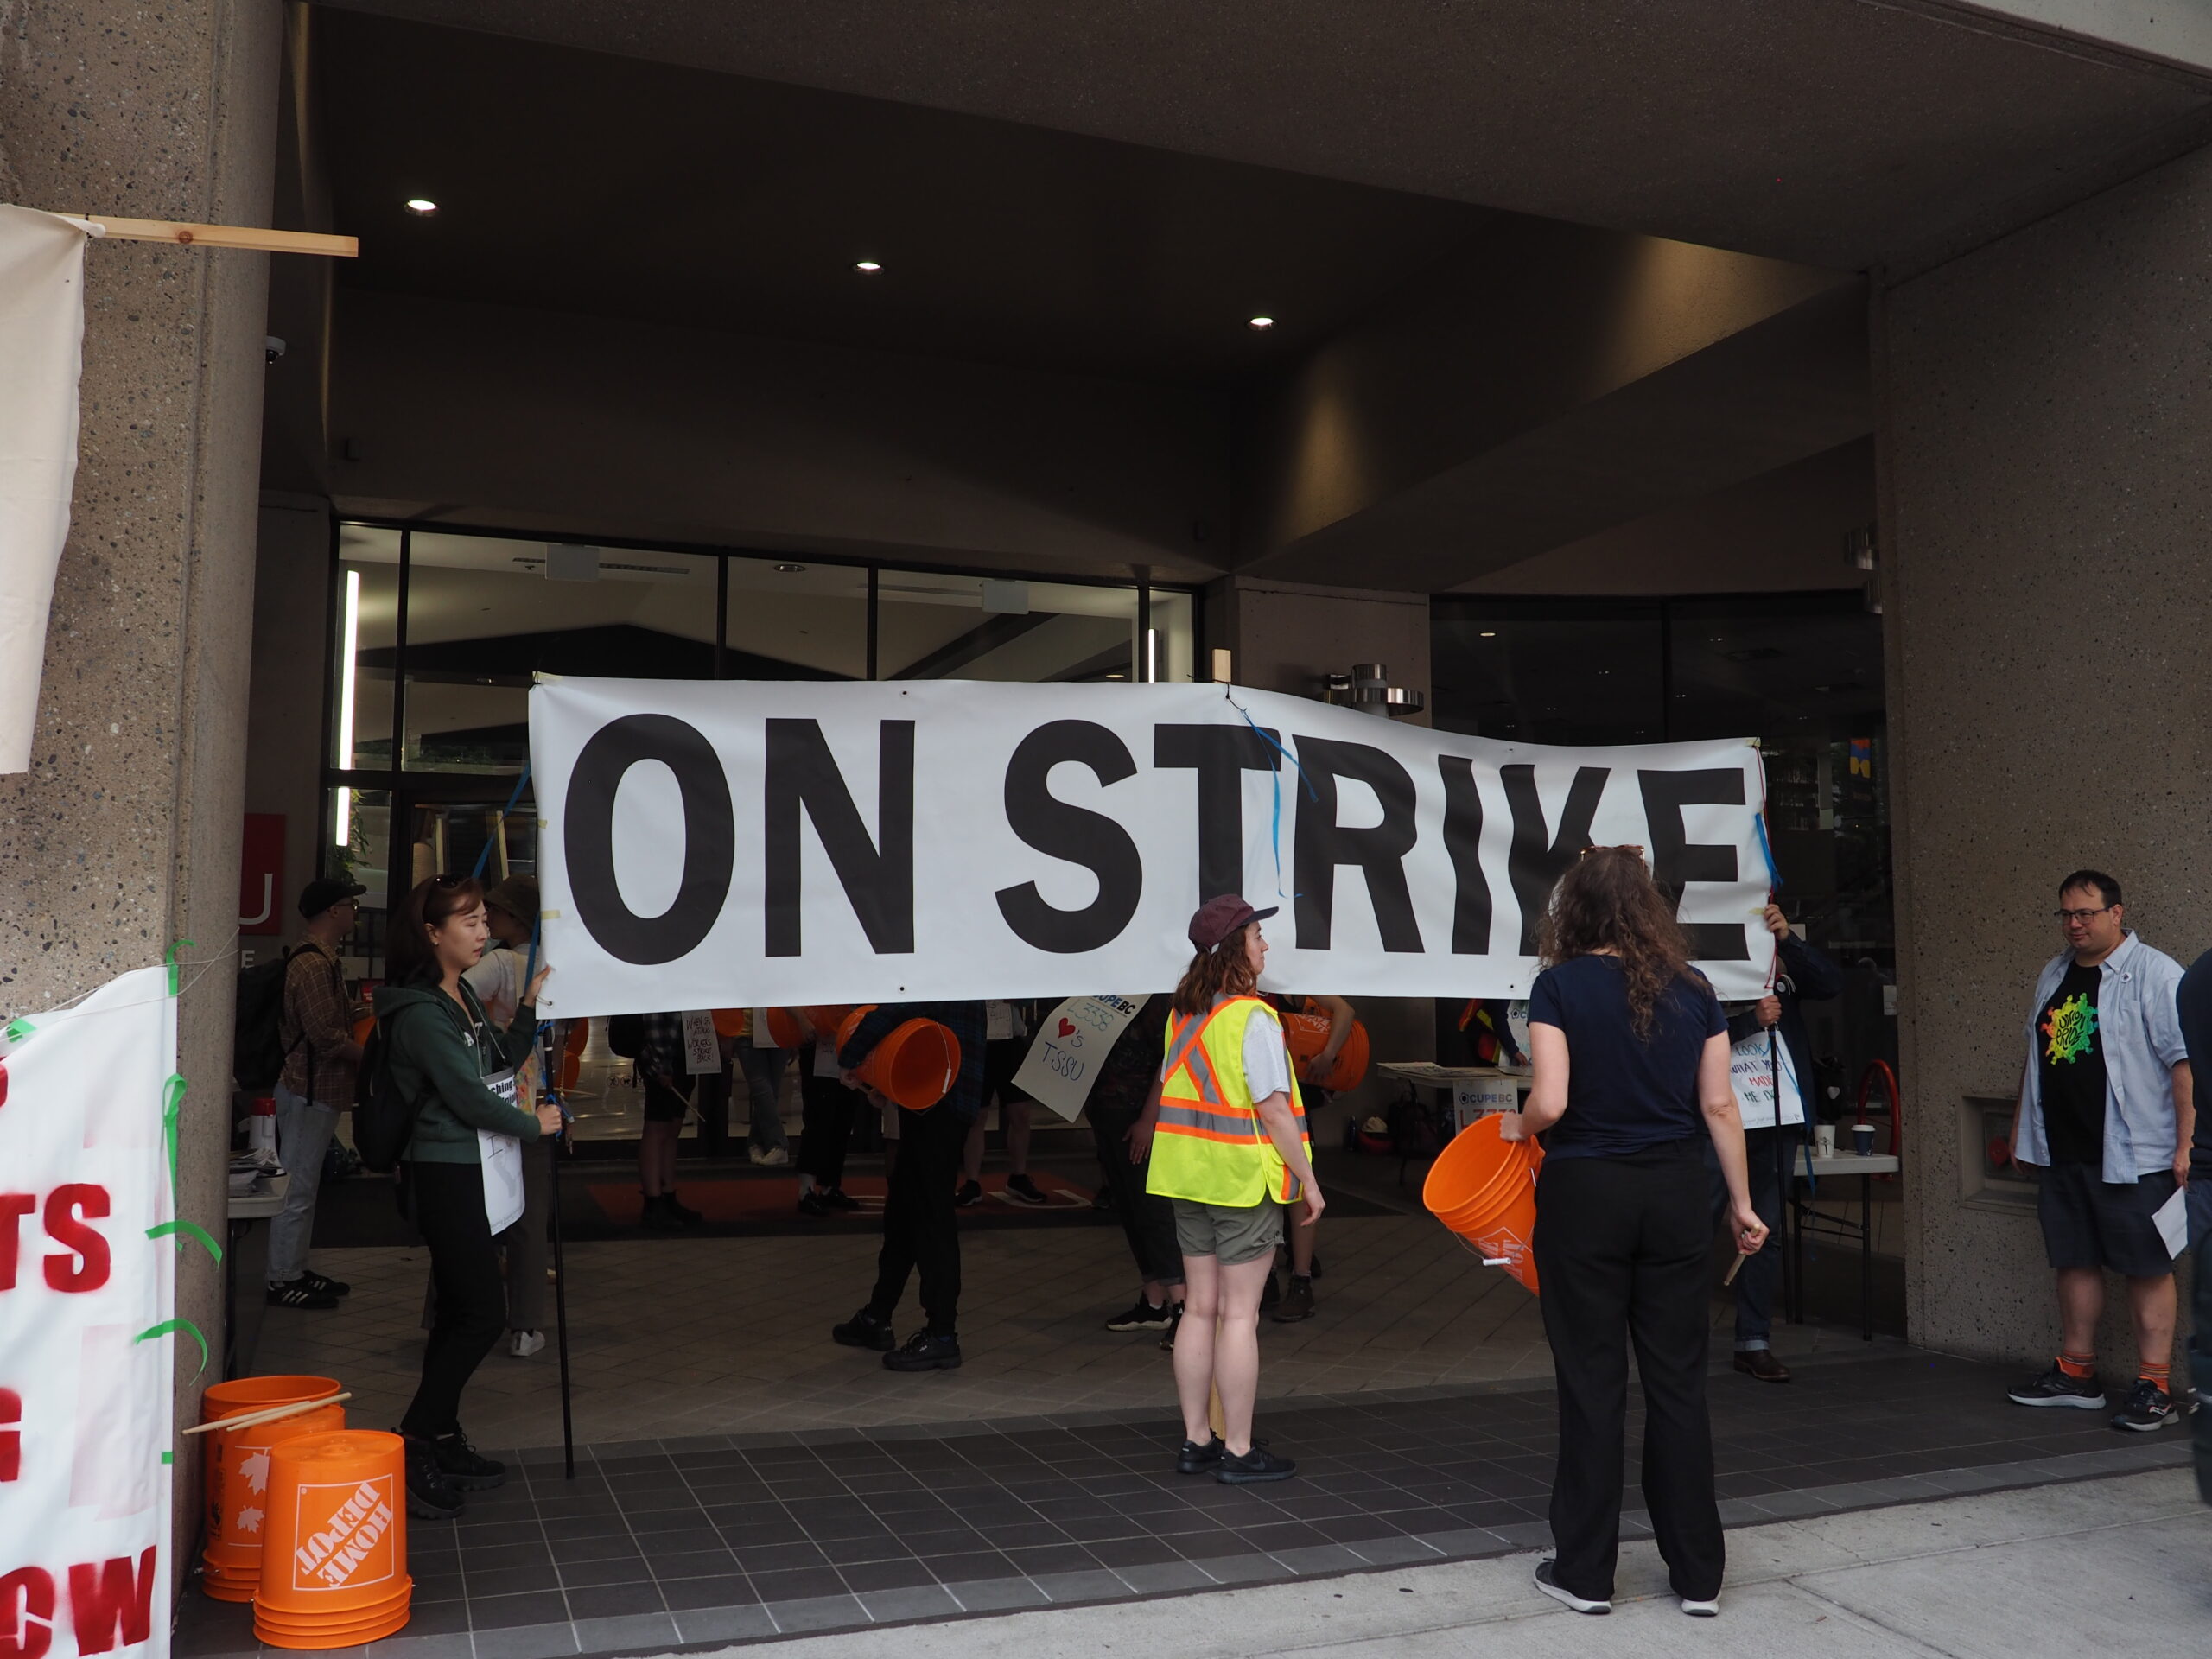 This is a photo of the picket line at SFU Harbour Centre. Members are holding a large banner in front of the doors that reads ON STRIKE